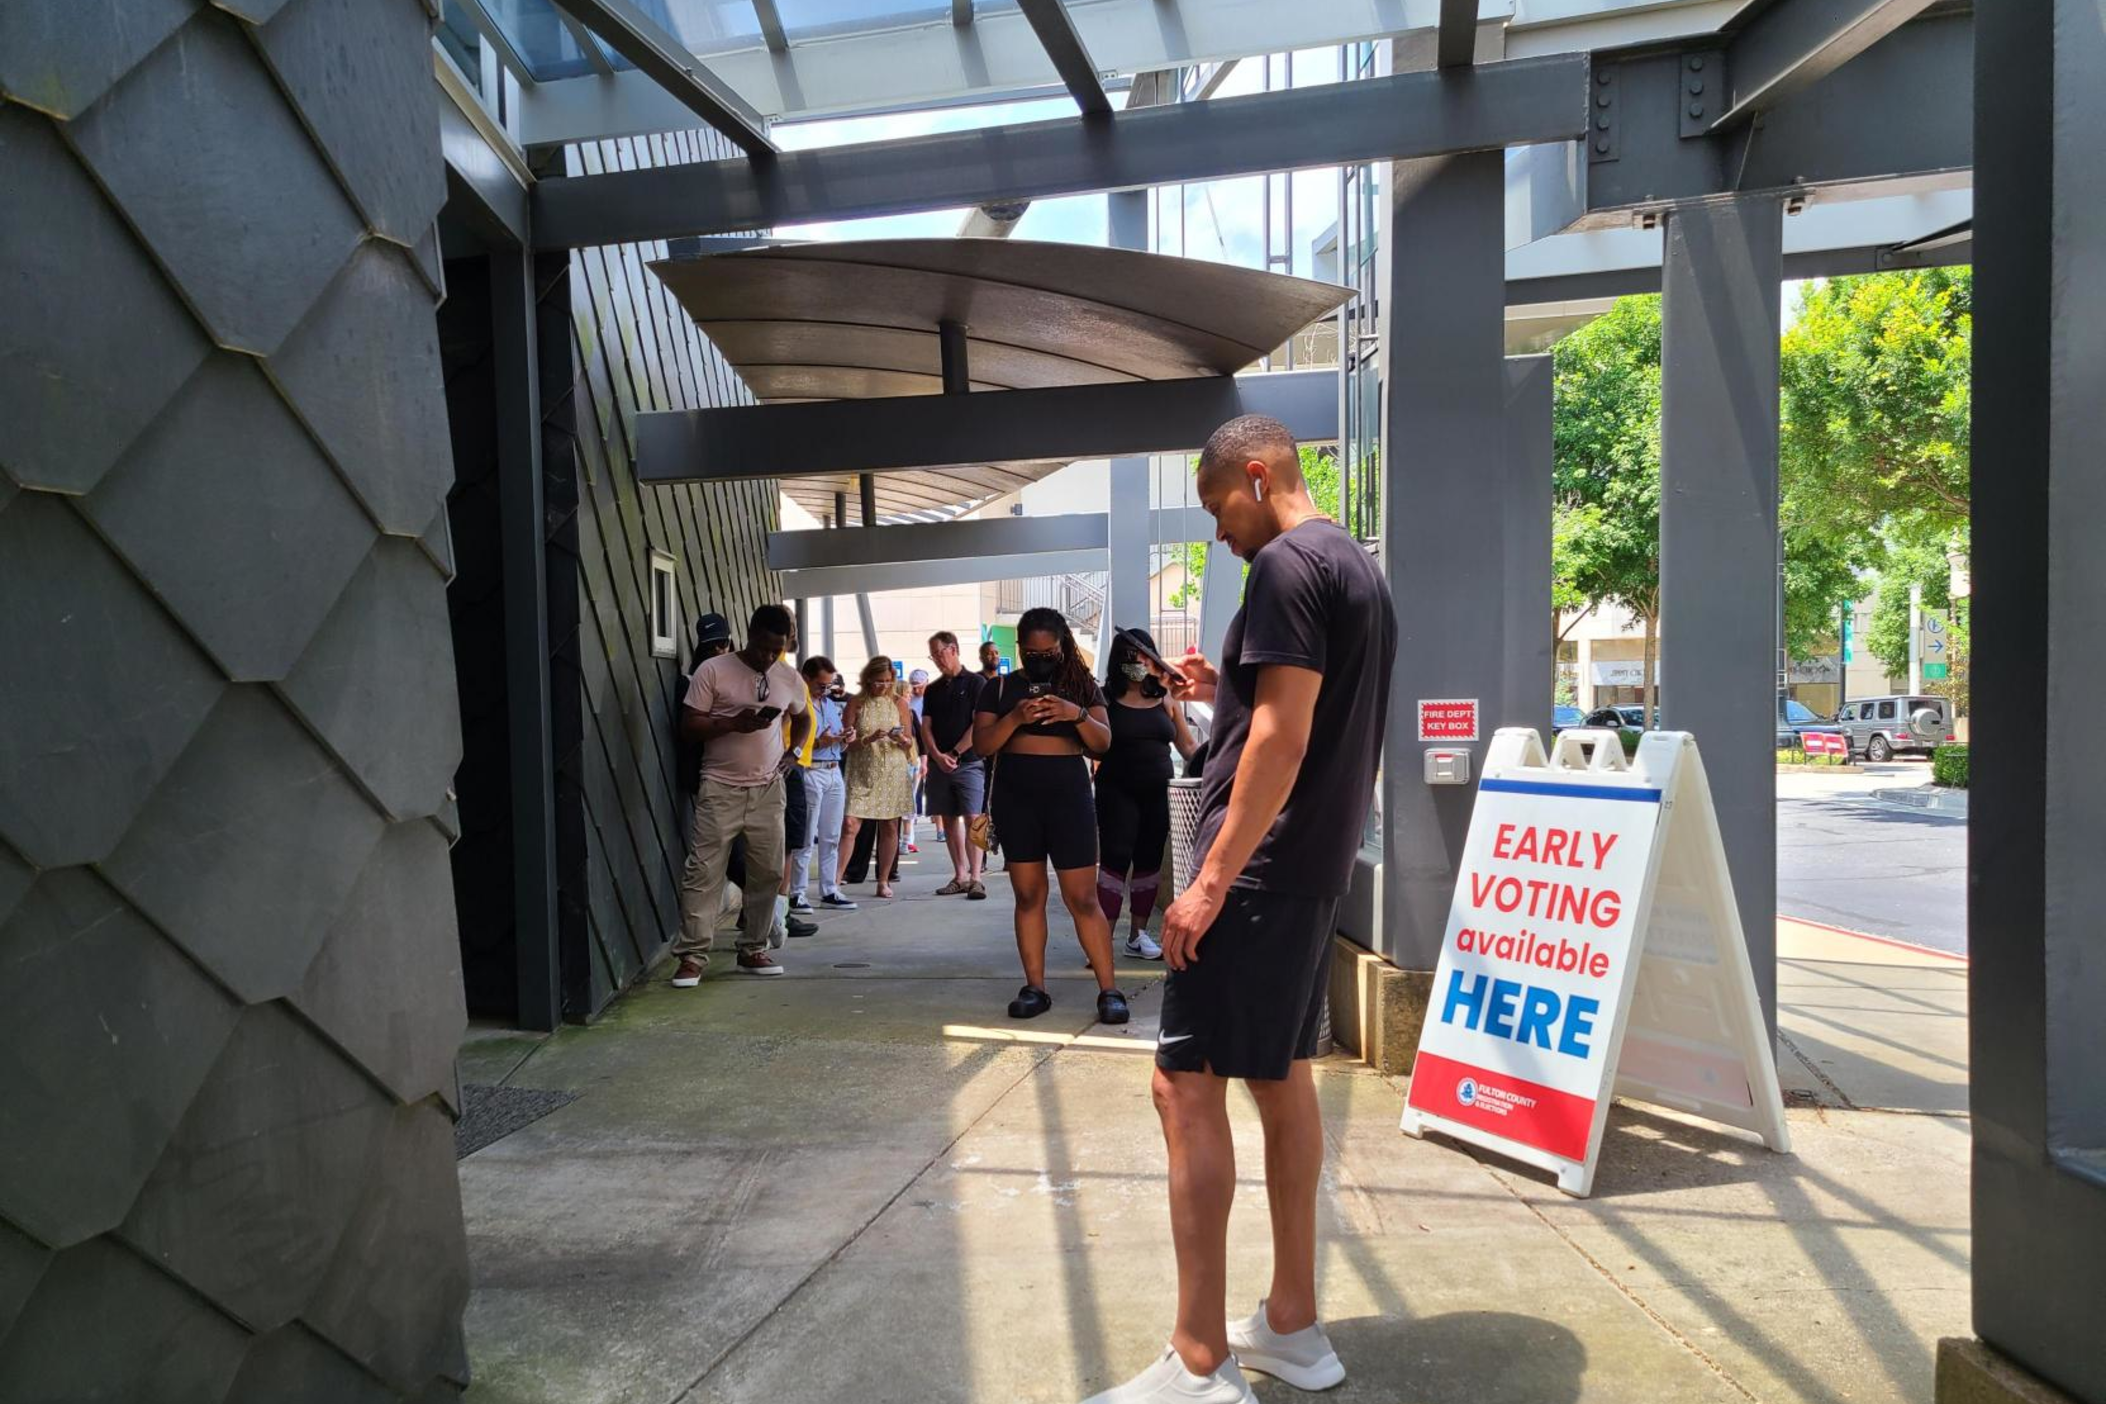 The line for early voting at the Buckhead Library in Atlanta on May 20, 2022.